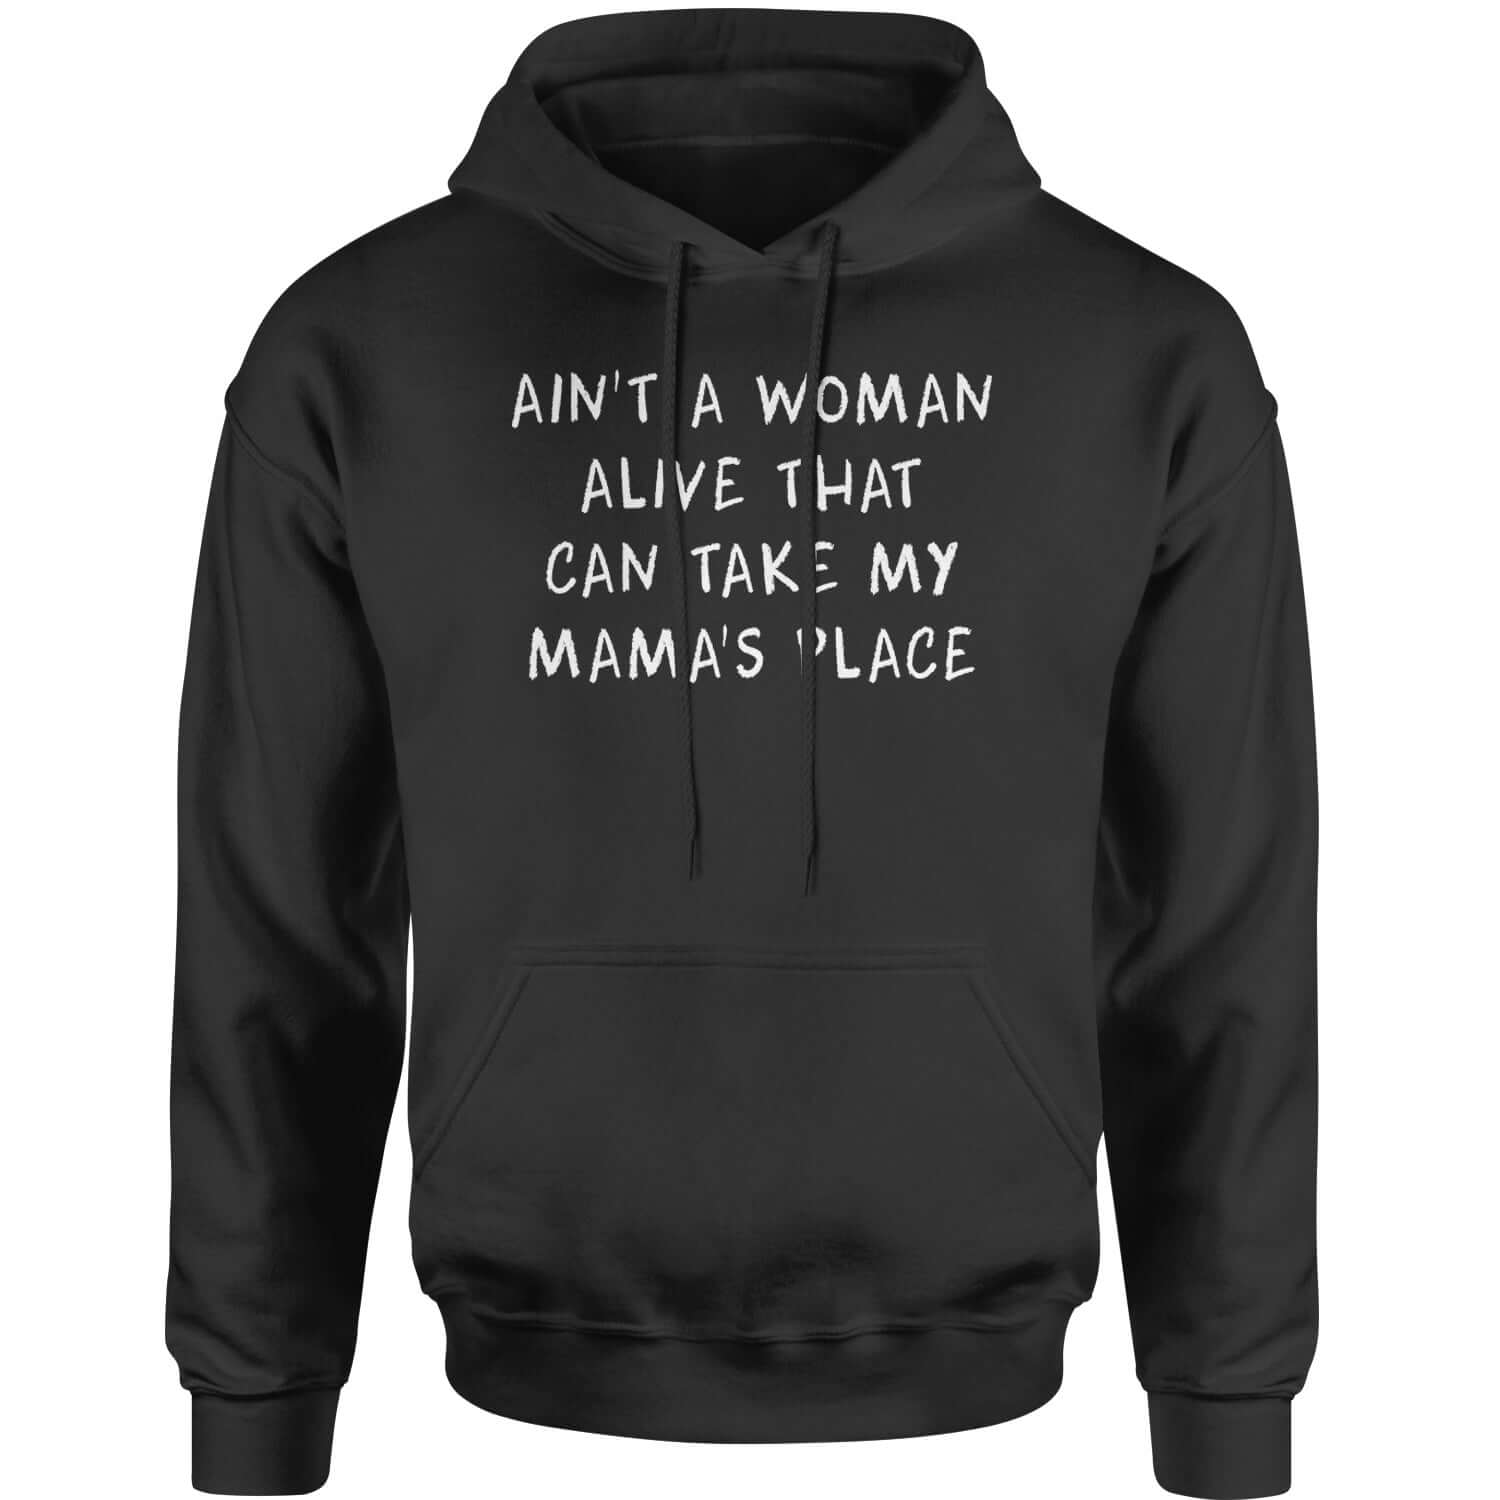 Ain't A Woman Alive That Can Take My Mama's Place Adult Hoodie Sweatshirt 2pac, bear, day, mama, mom, mothers, shakur, tupac by Expression Tees